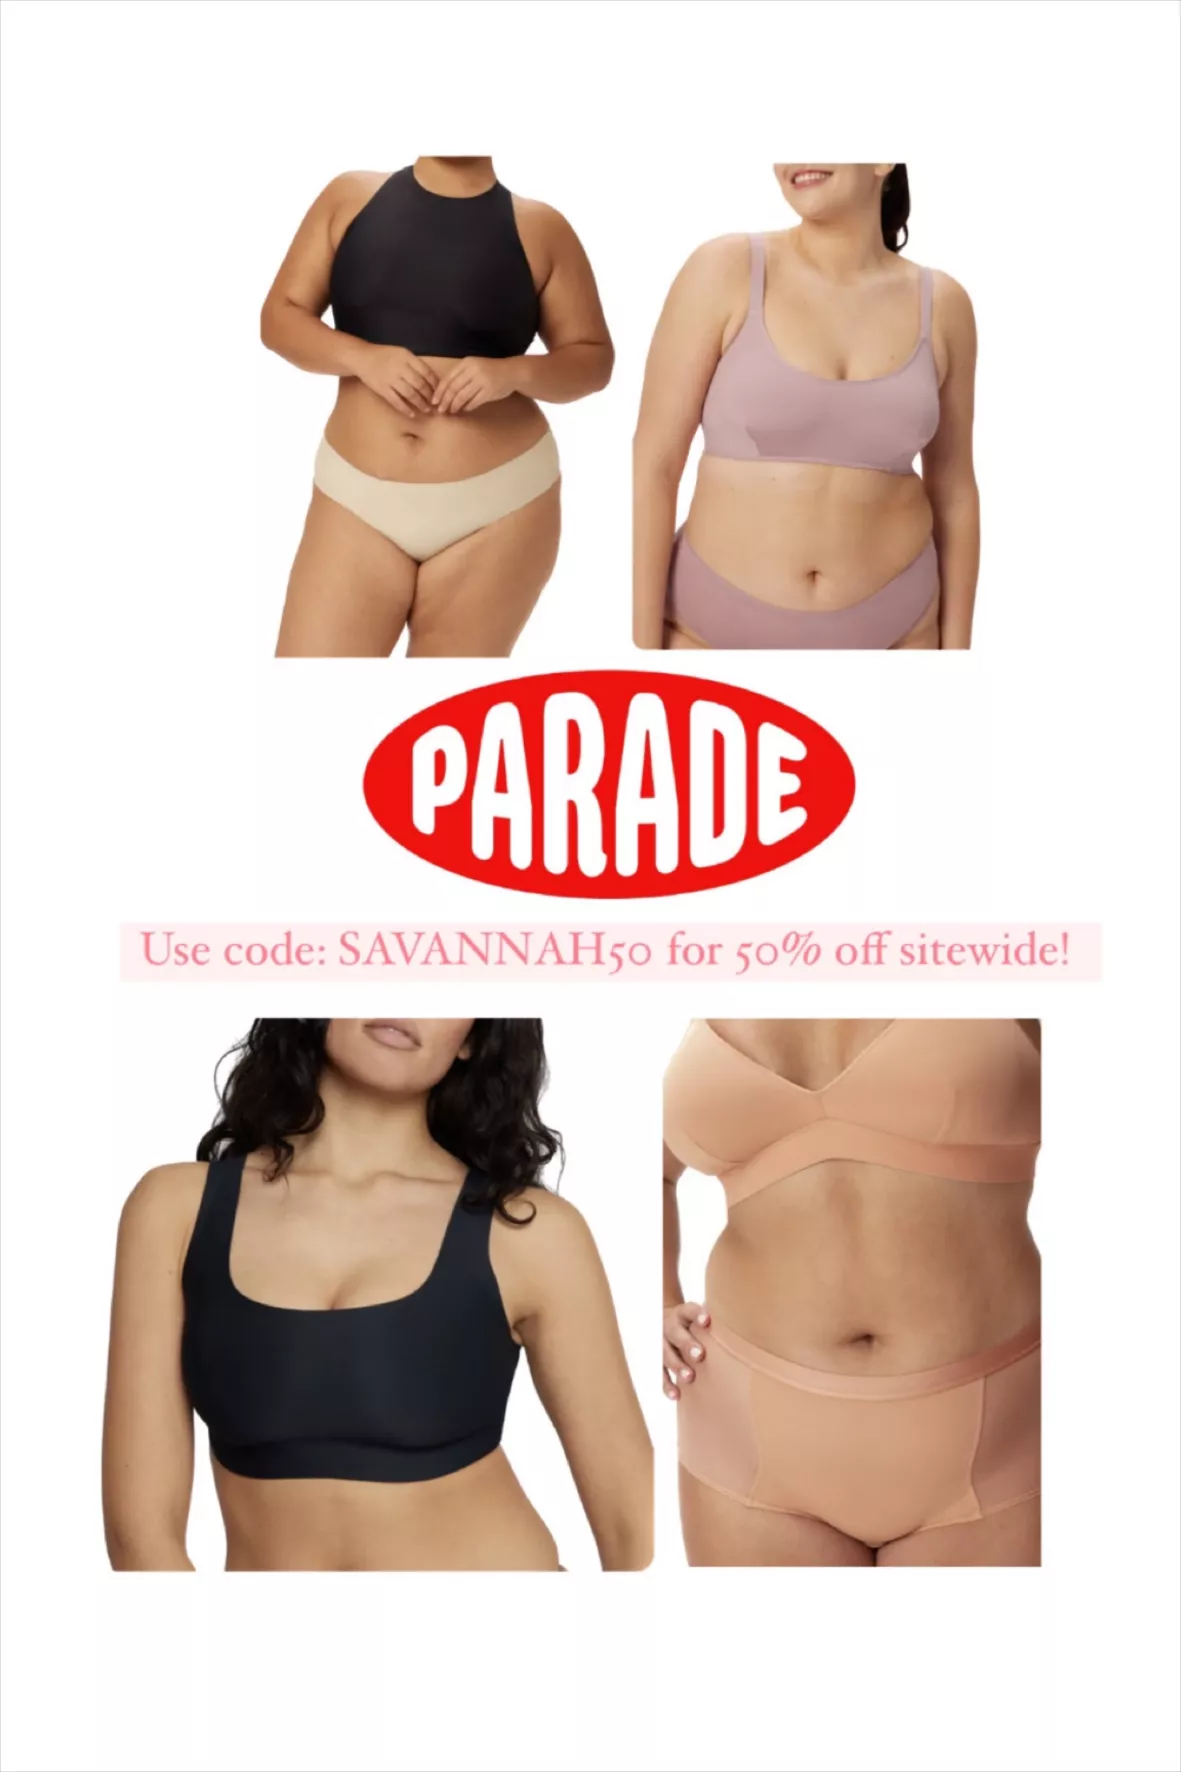 I decided to try out some of the bras from @Parade and I was